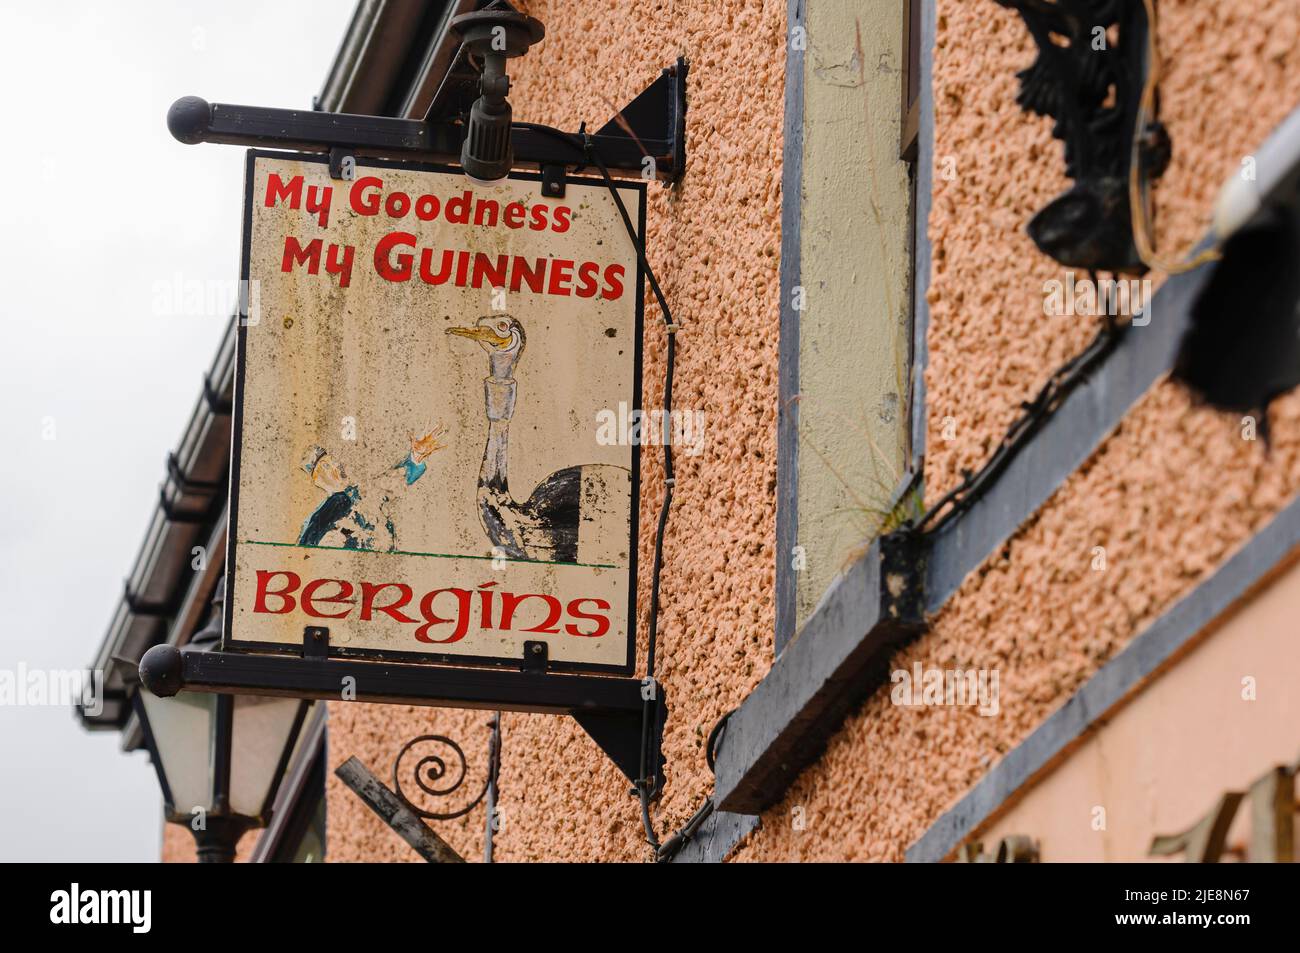 Very old Guinness sign outside an Irish pub with the slogan 'My goodness, My Guinness' Stock Photo